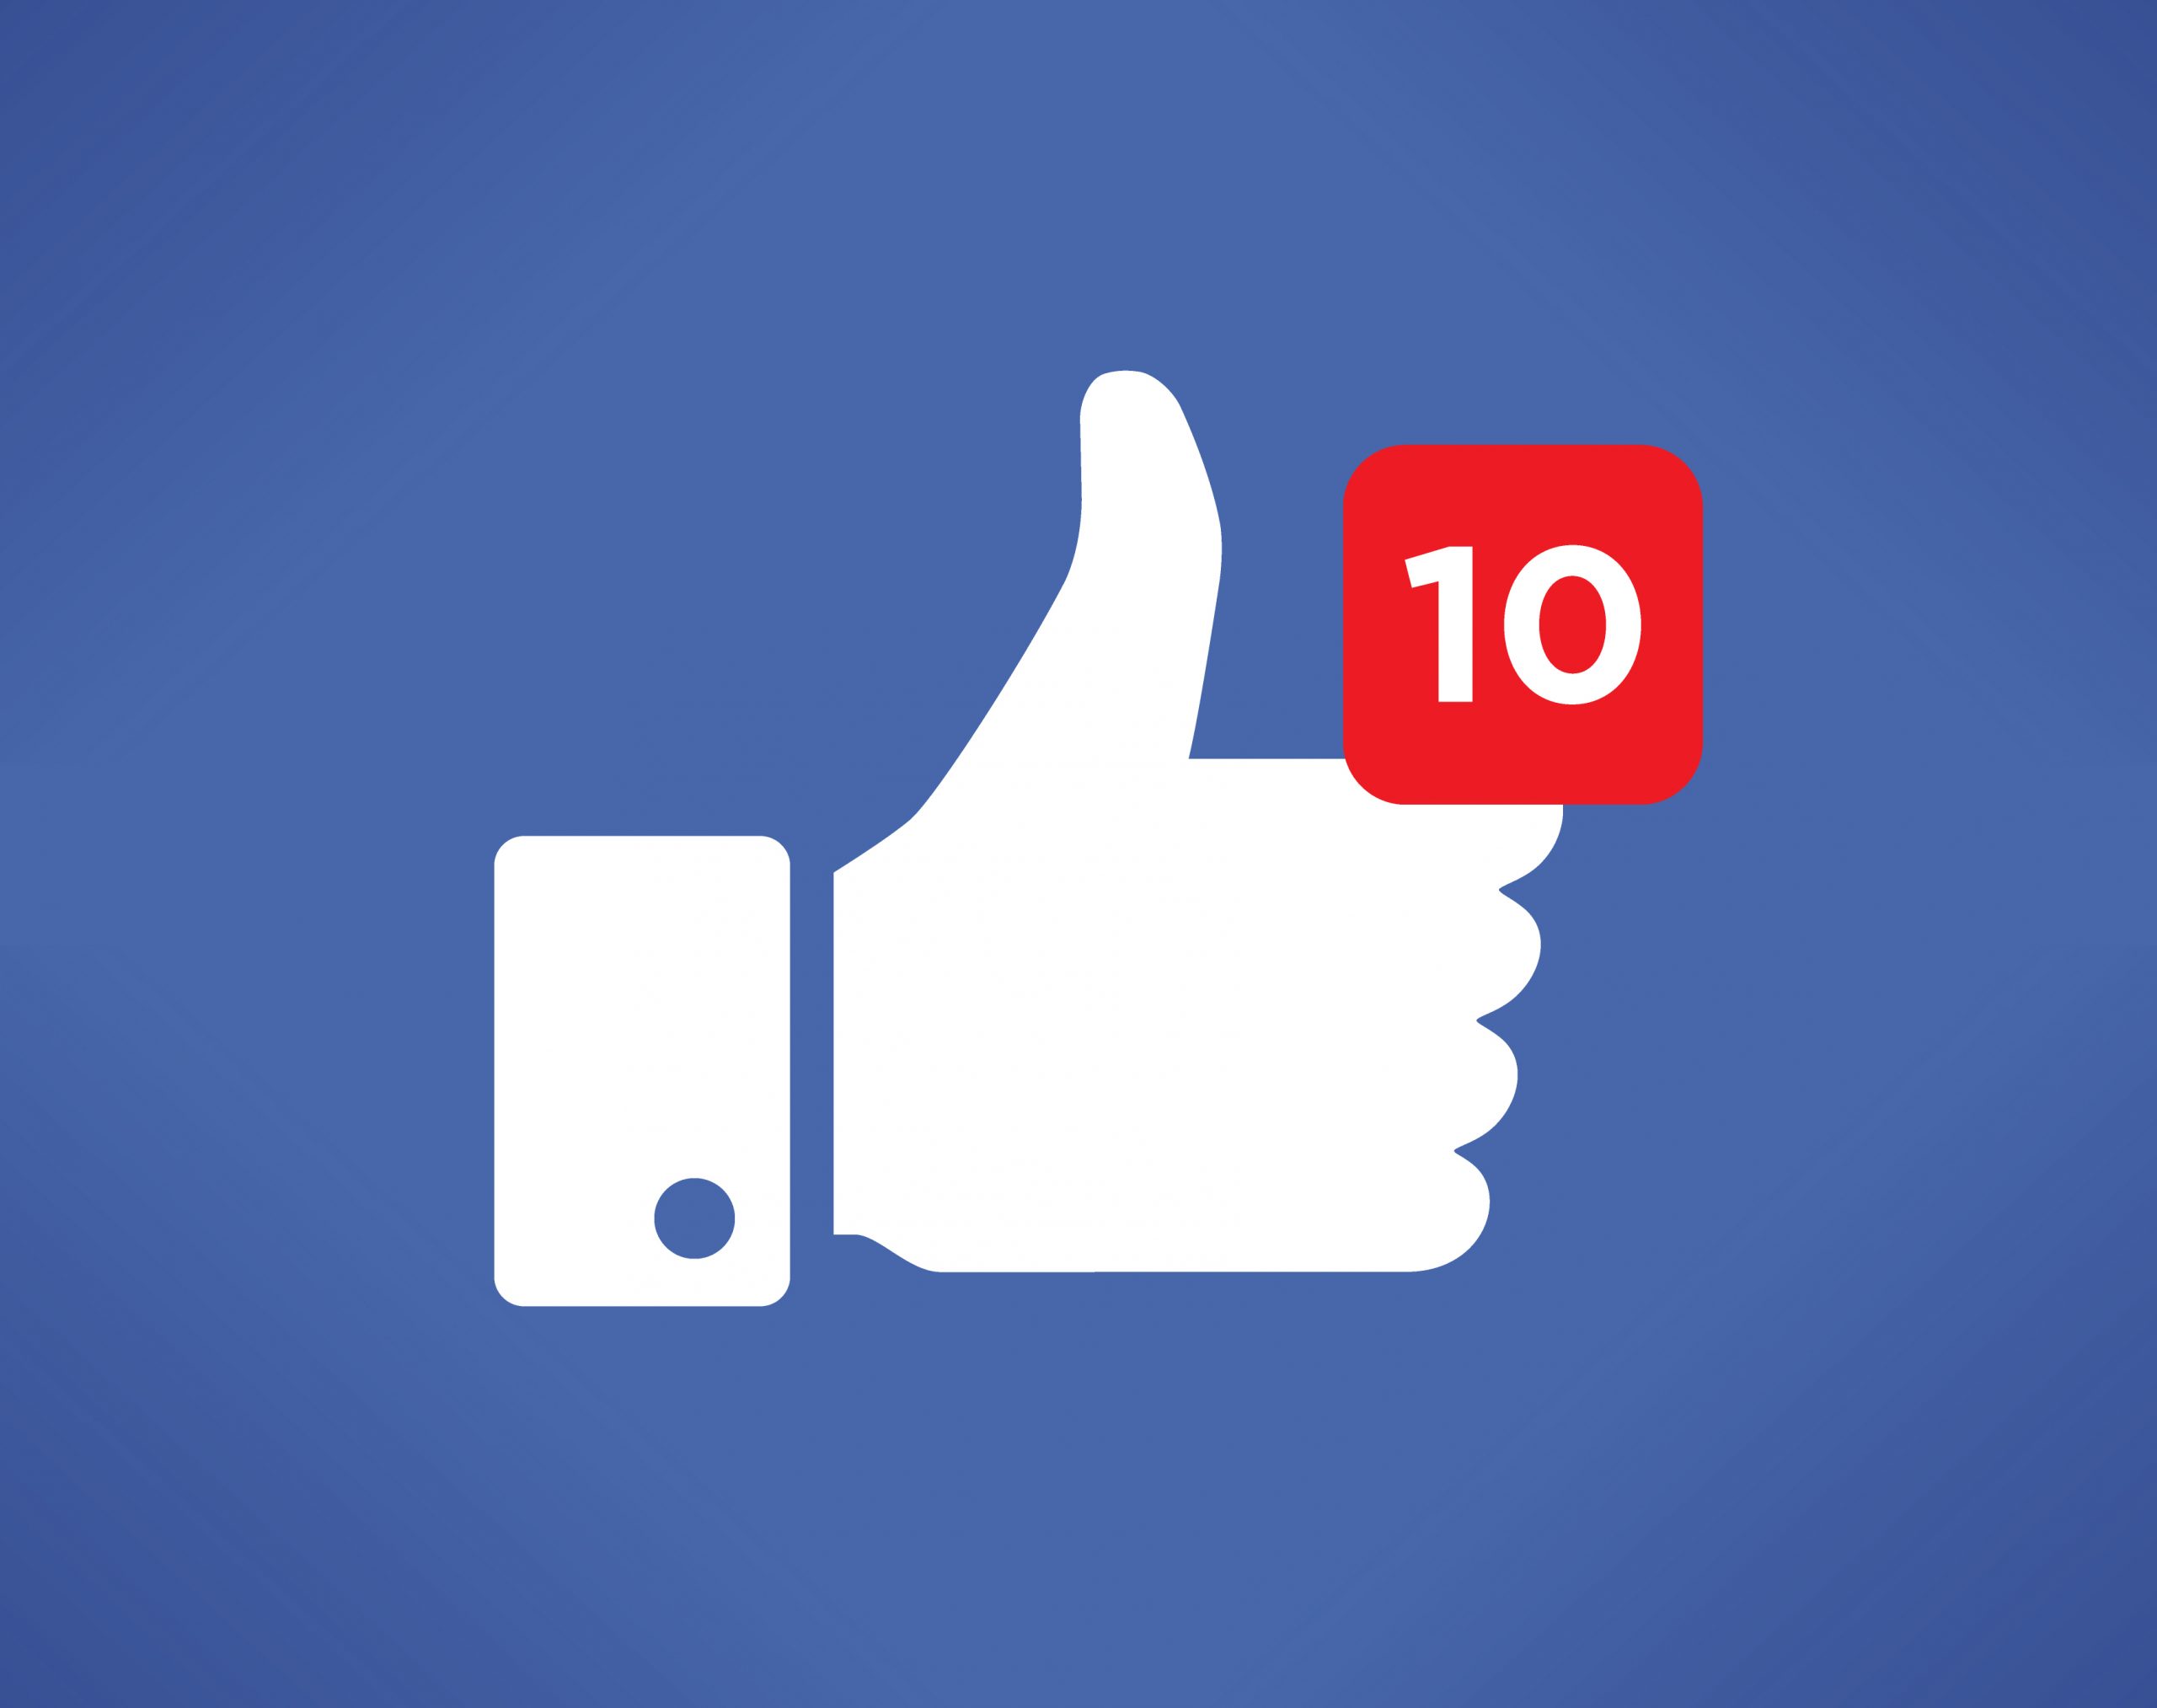 4 Question Posts to Boost Facebook Engagement, ITVibes Design & Marketing, The Woodlands, TX